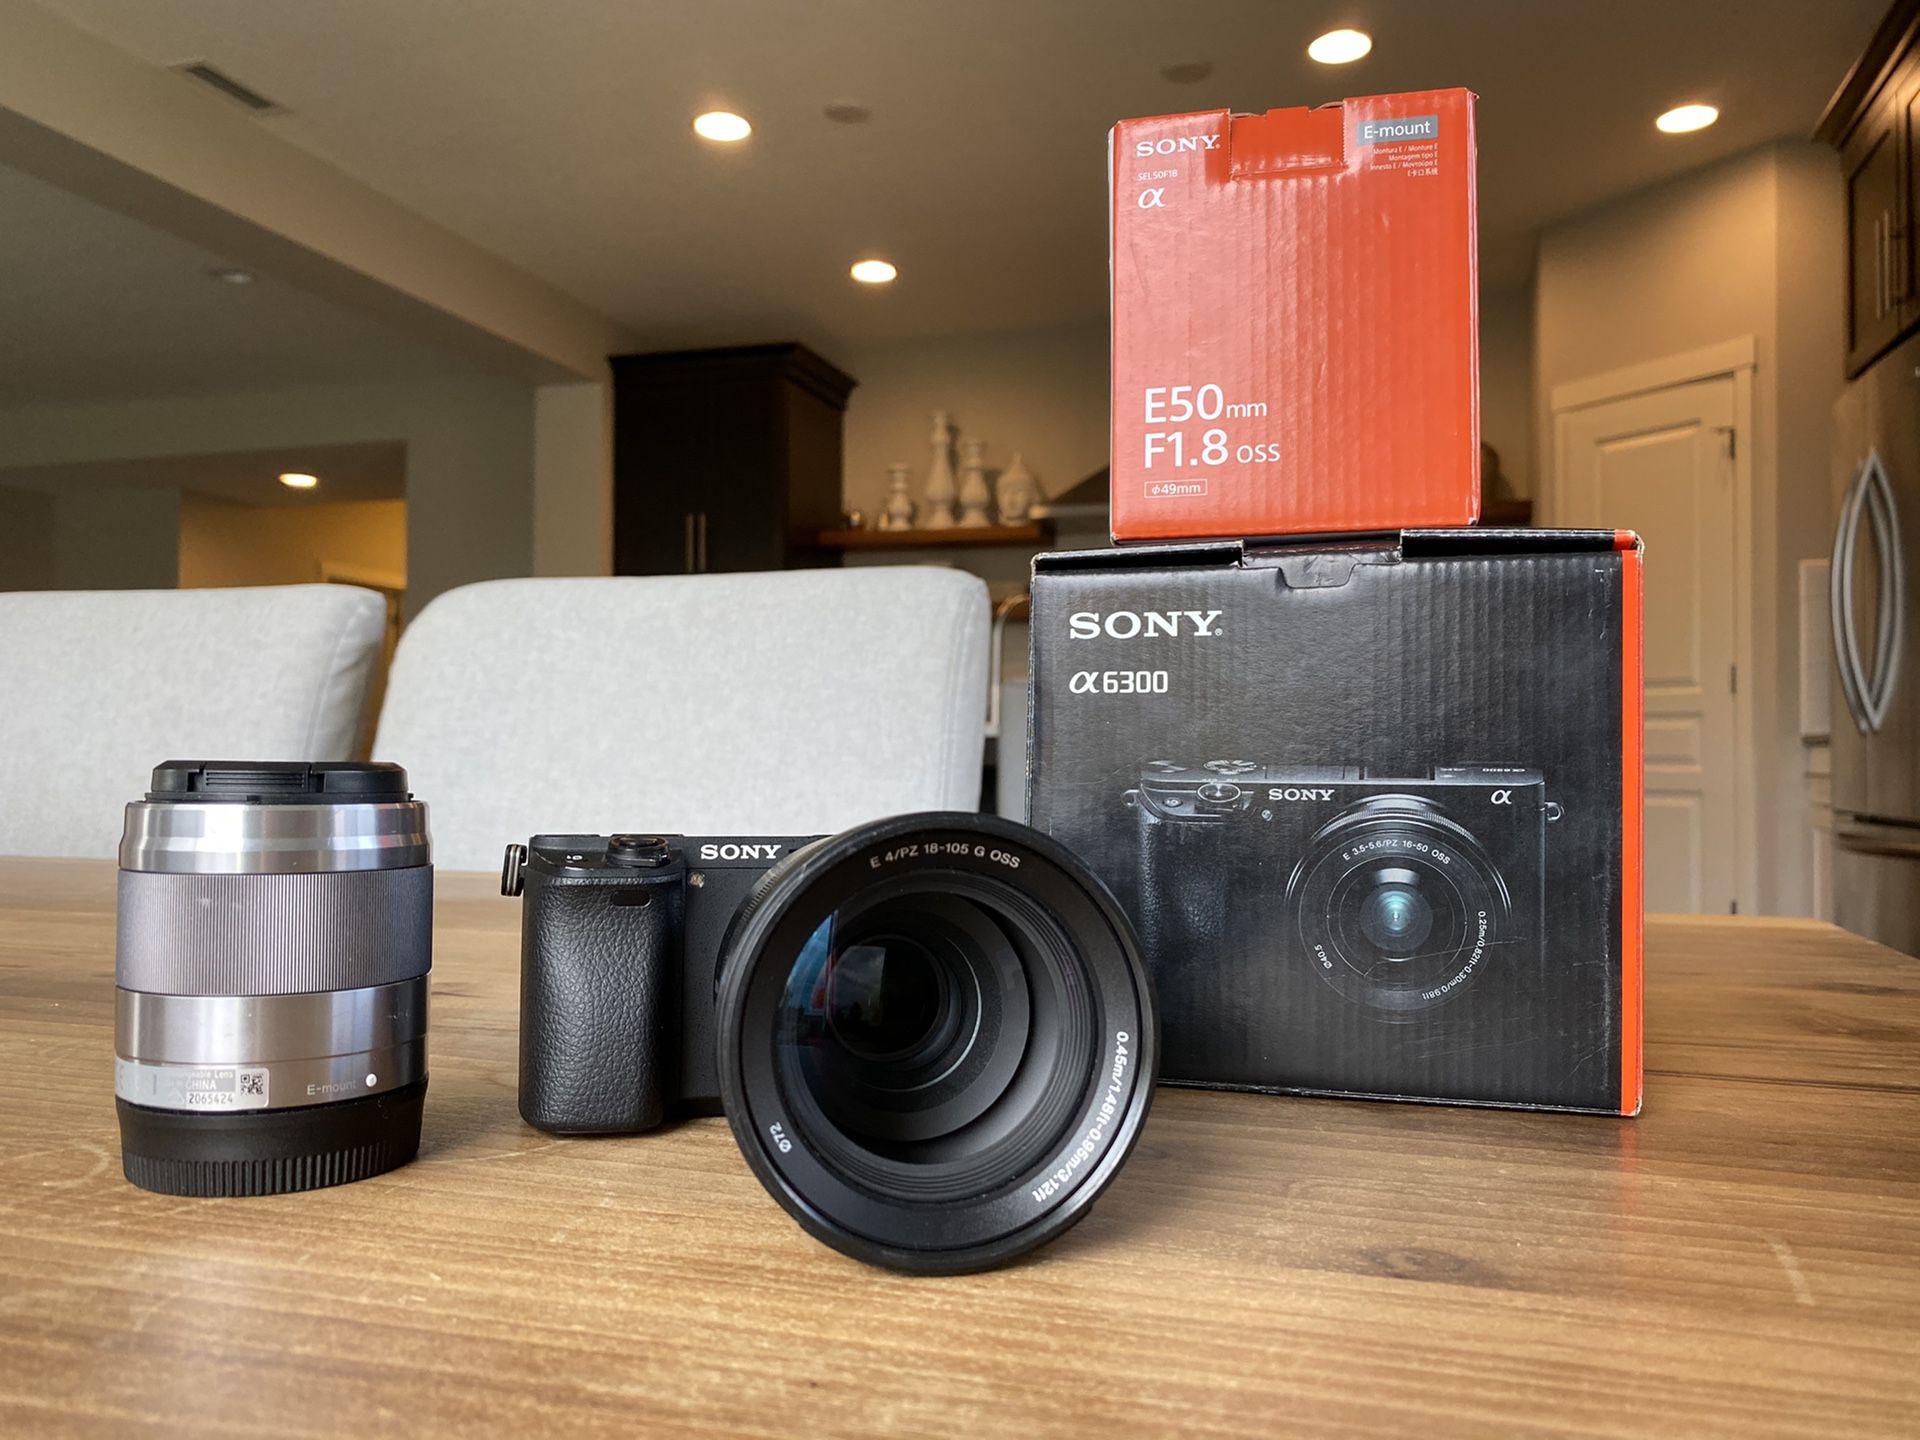 Sony a6300 + Sony 18-105 mm f4 and more